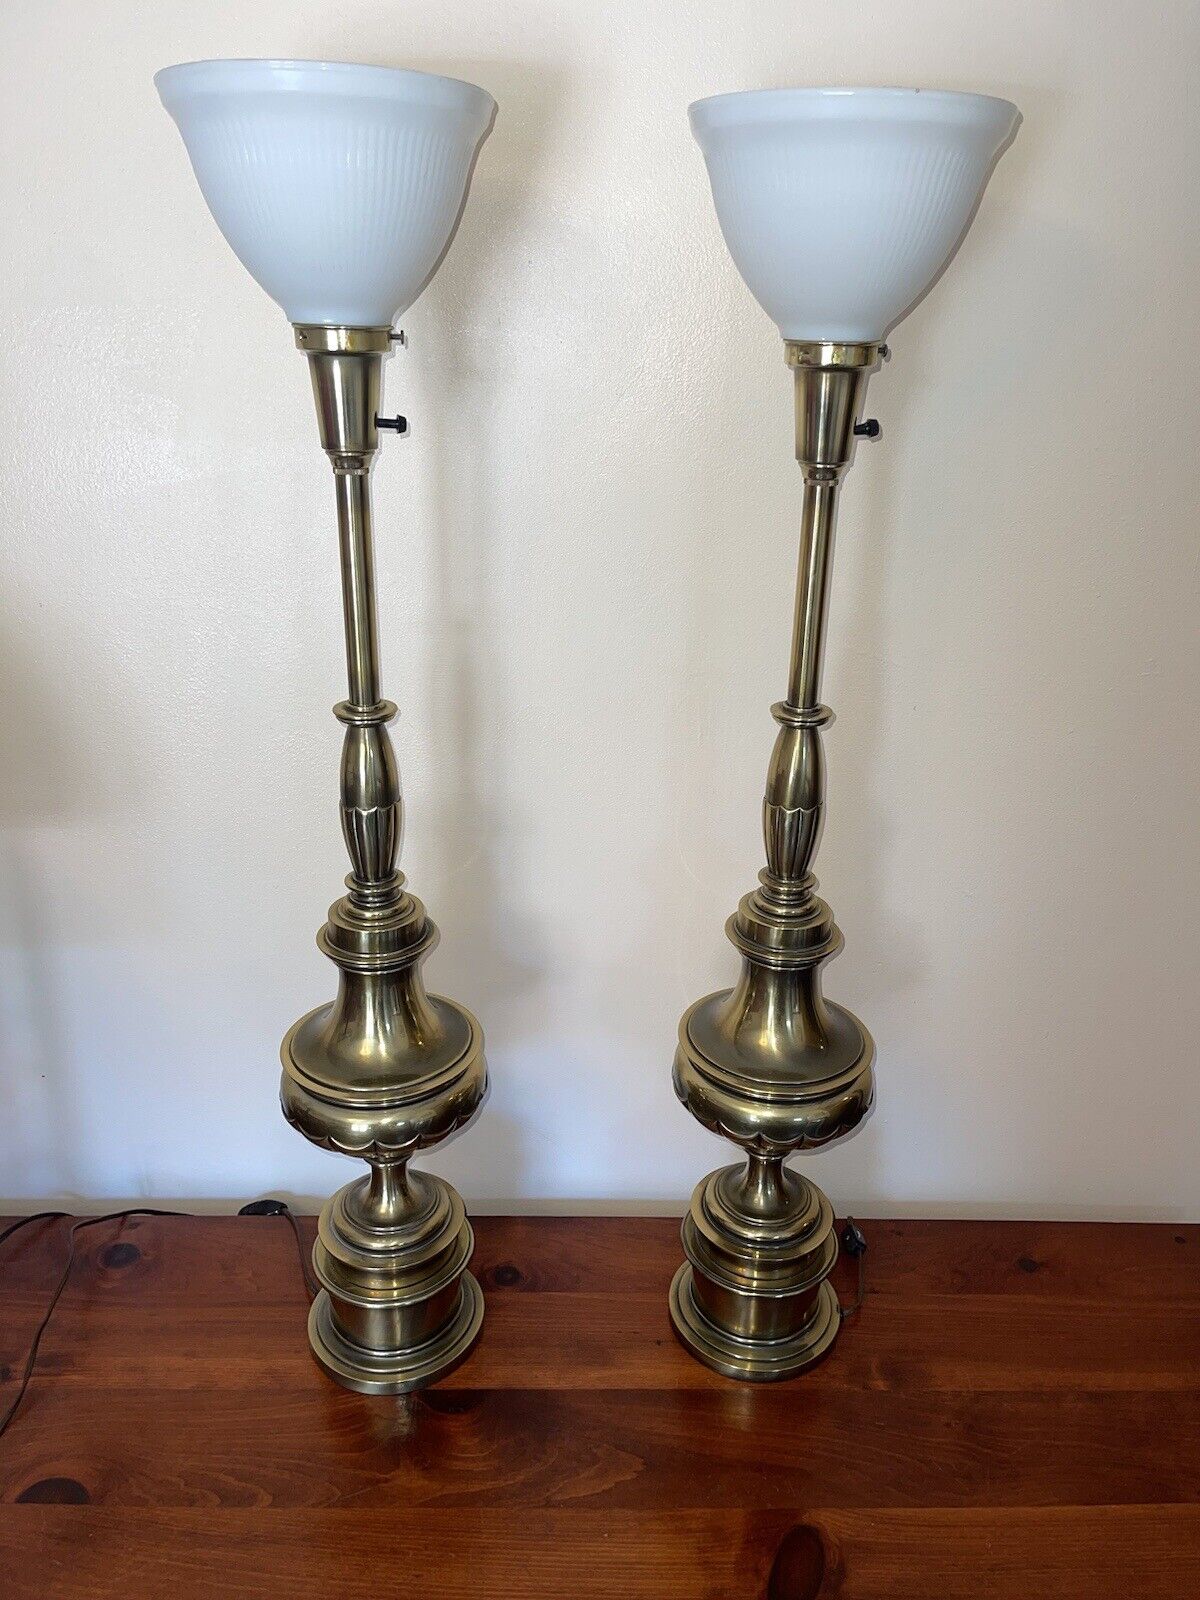 A Pair of Vintage Stiffel Brass Table Lamps 37” Tall & 15lbs Each Nice Condition